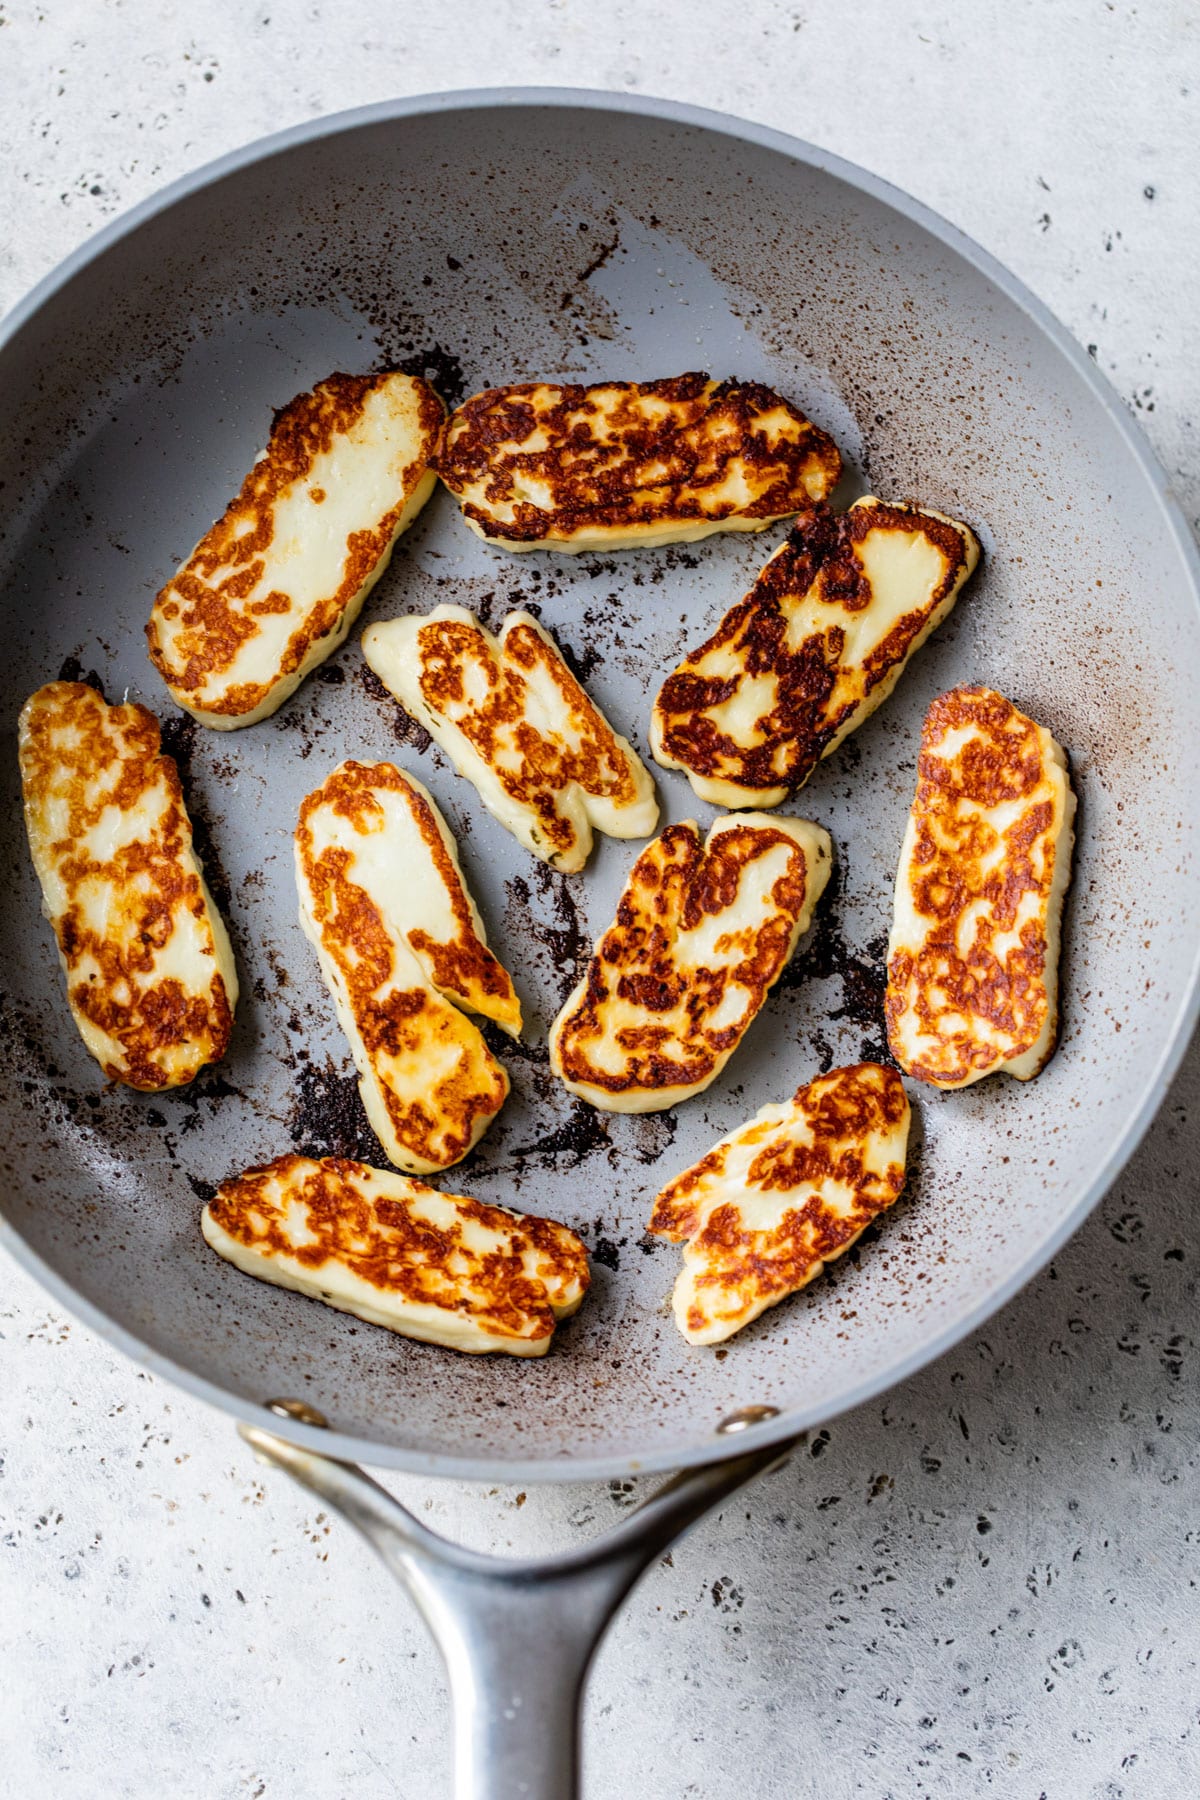 fried halloumi slices in a skillet